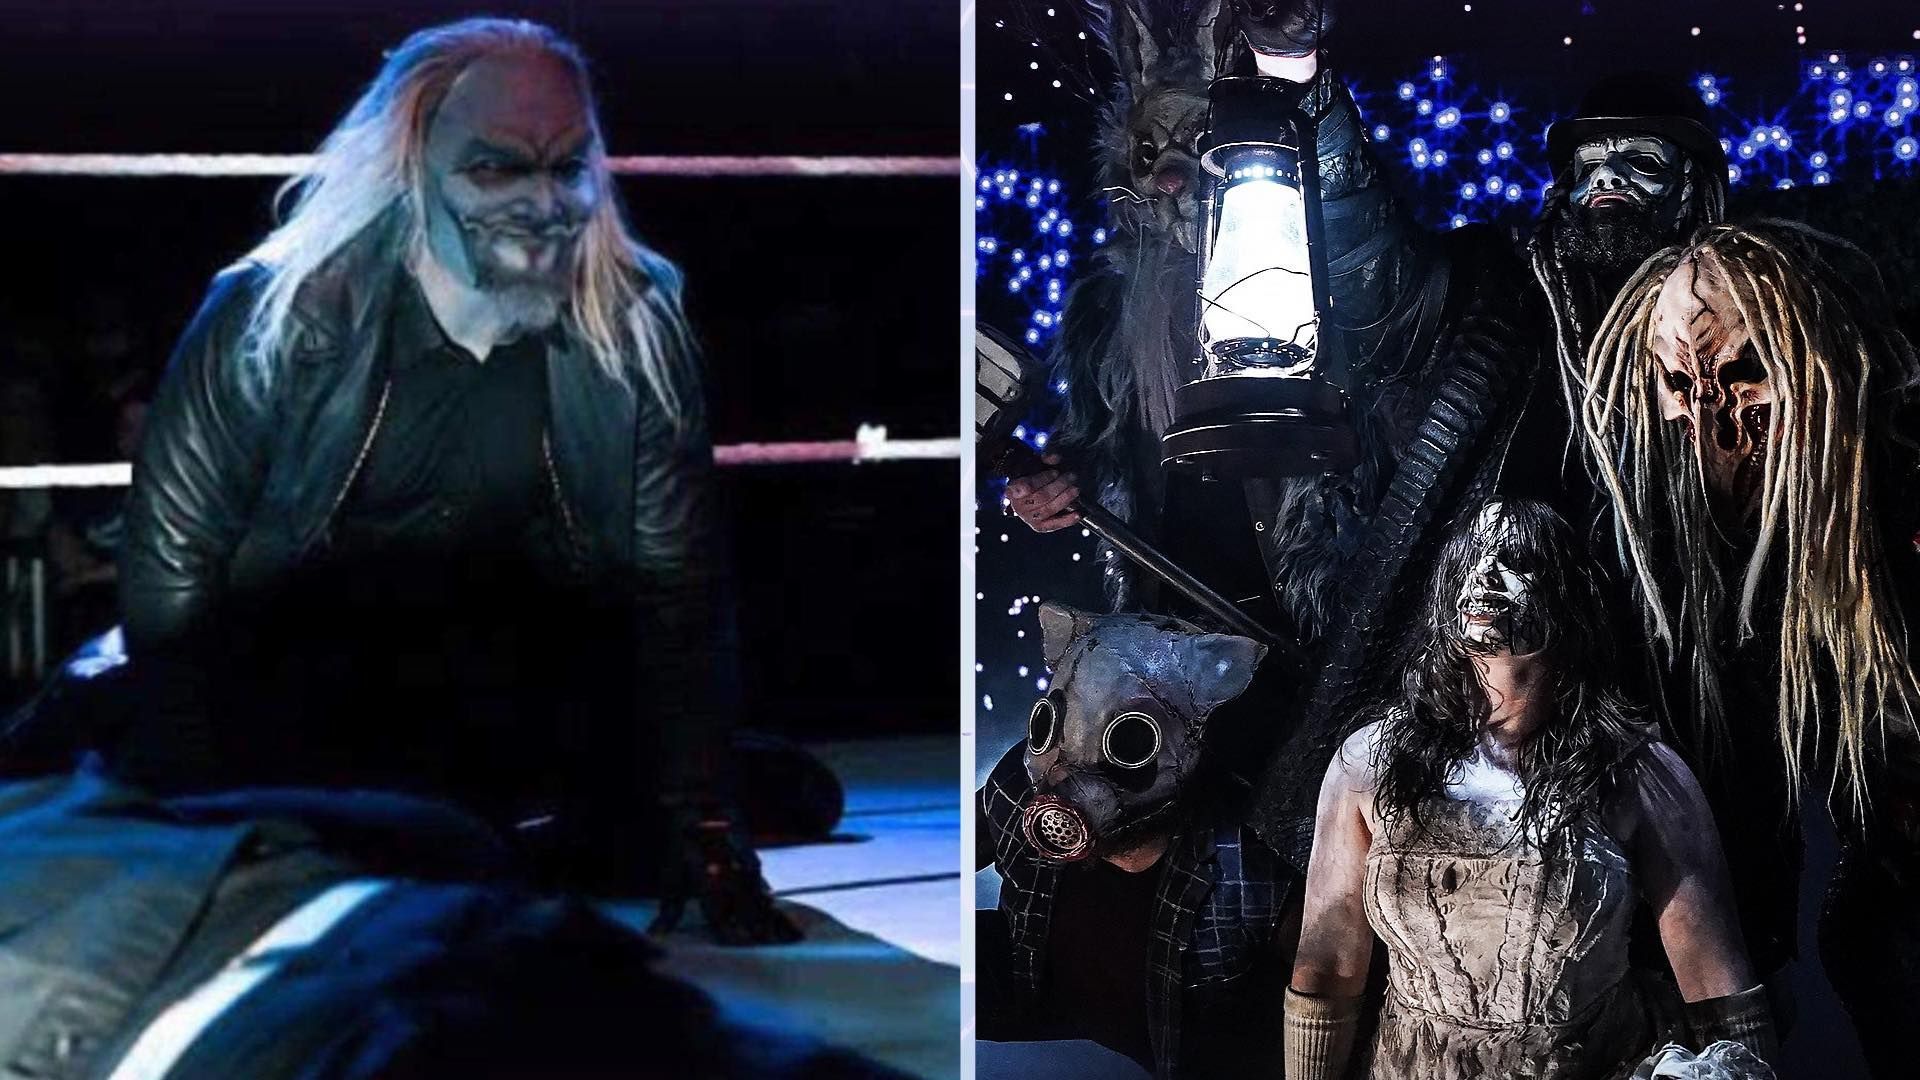 Uncle Howdy and the Wyatt Sicks on RAW [Image Credits: WWE]